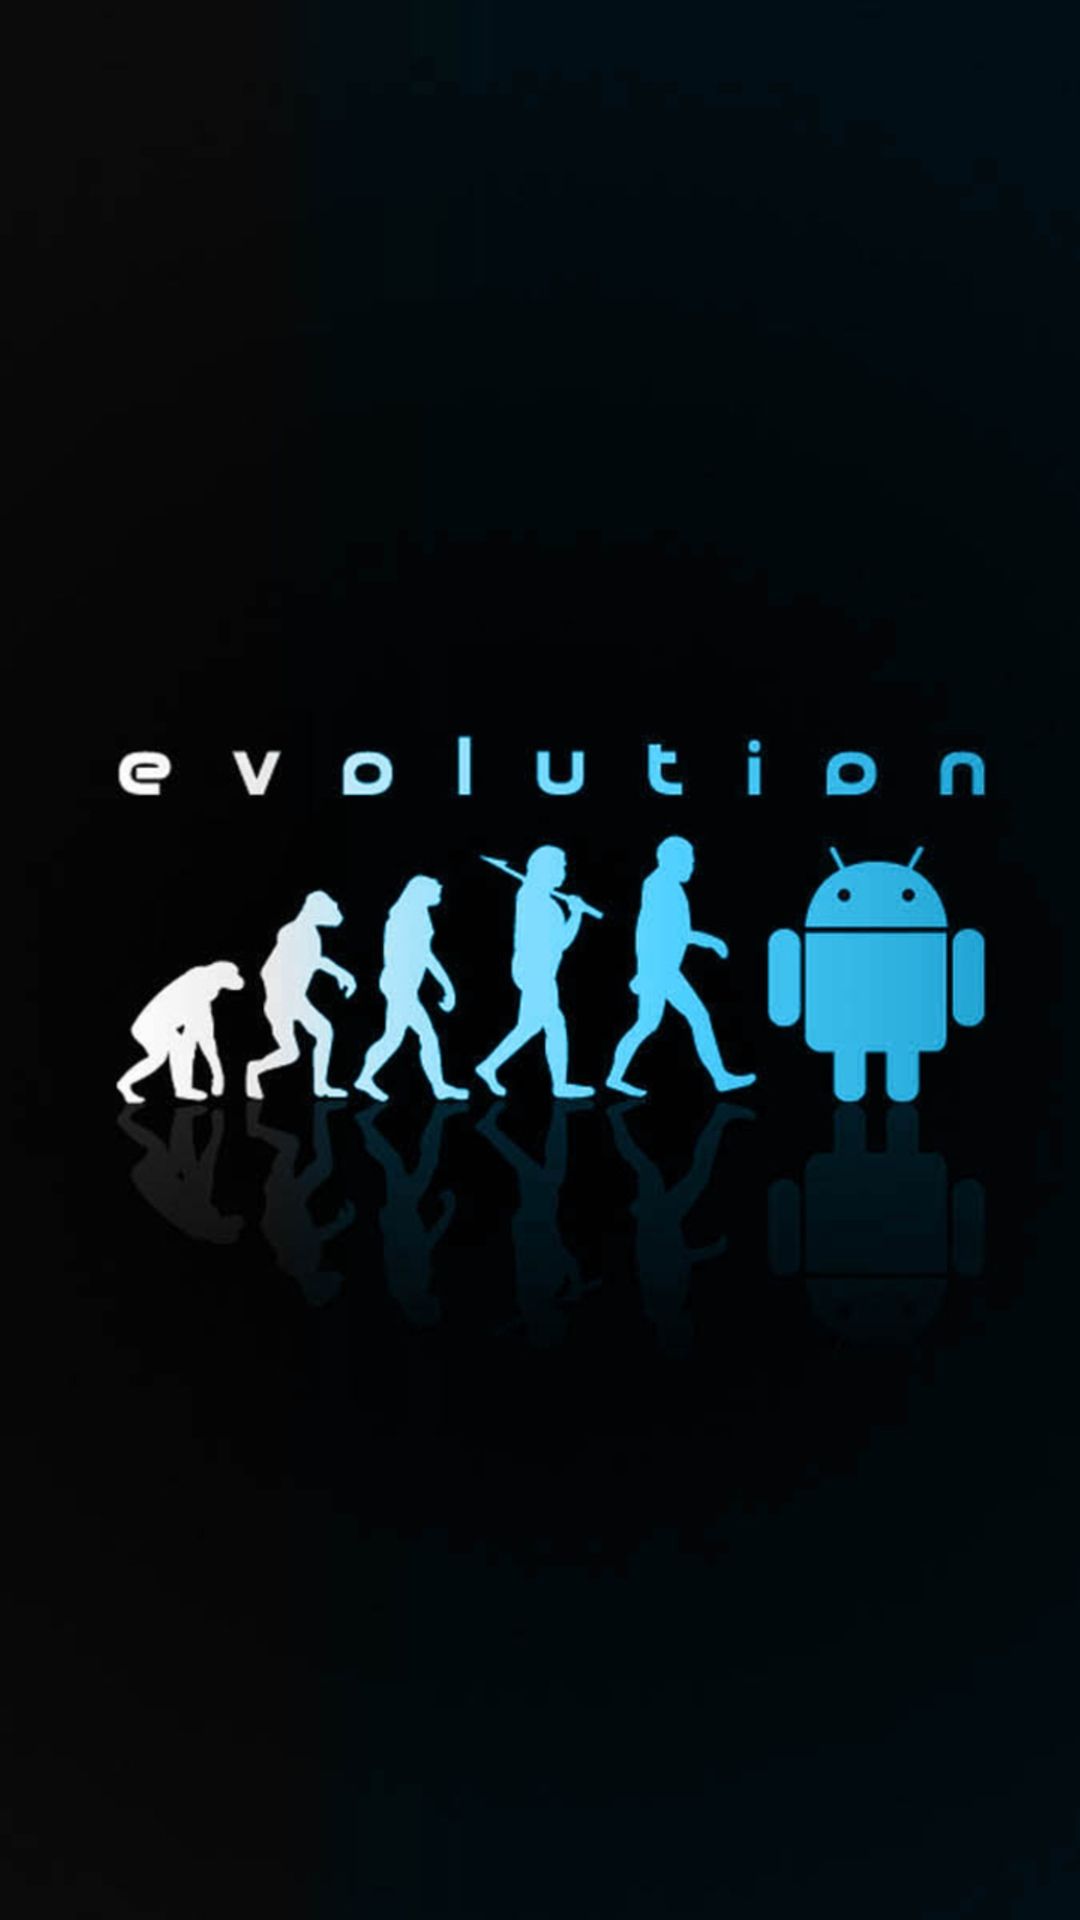 Android Evolution android wallpaper Evolution Android